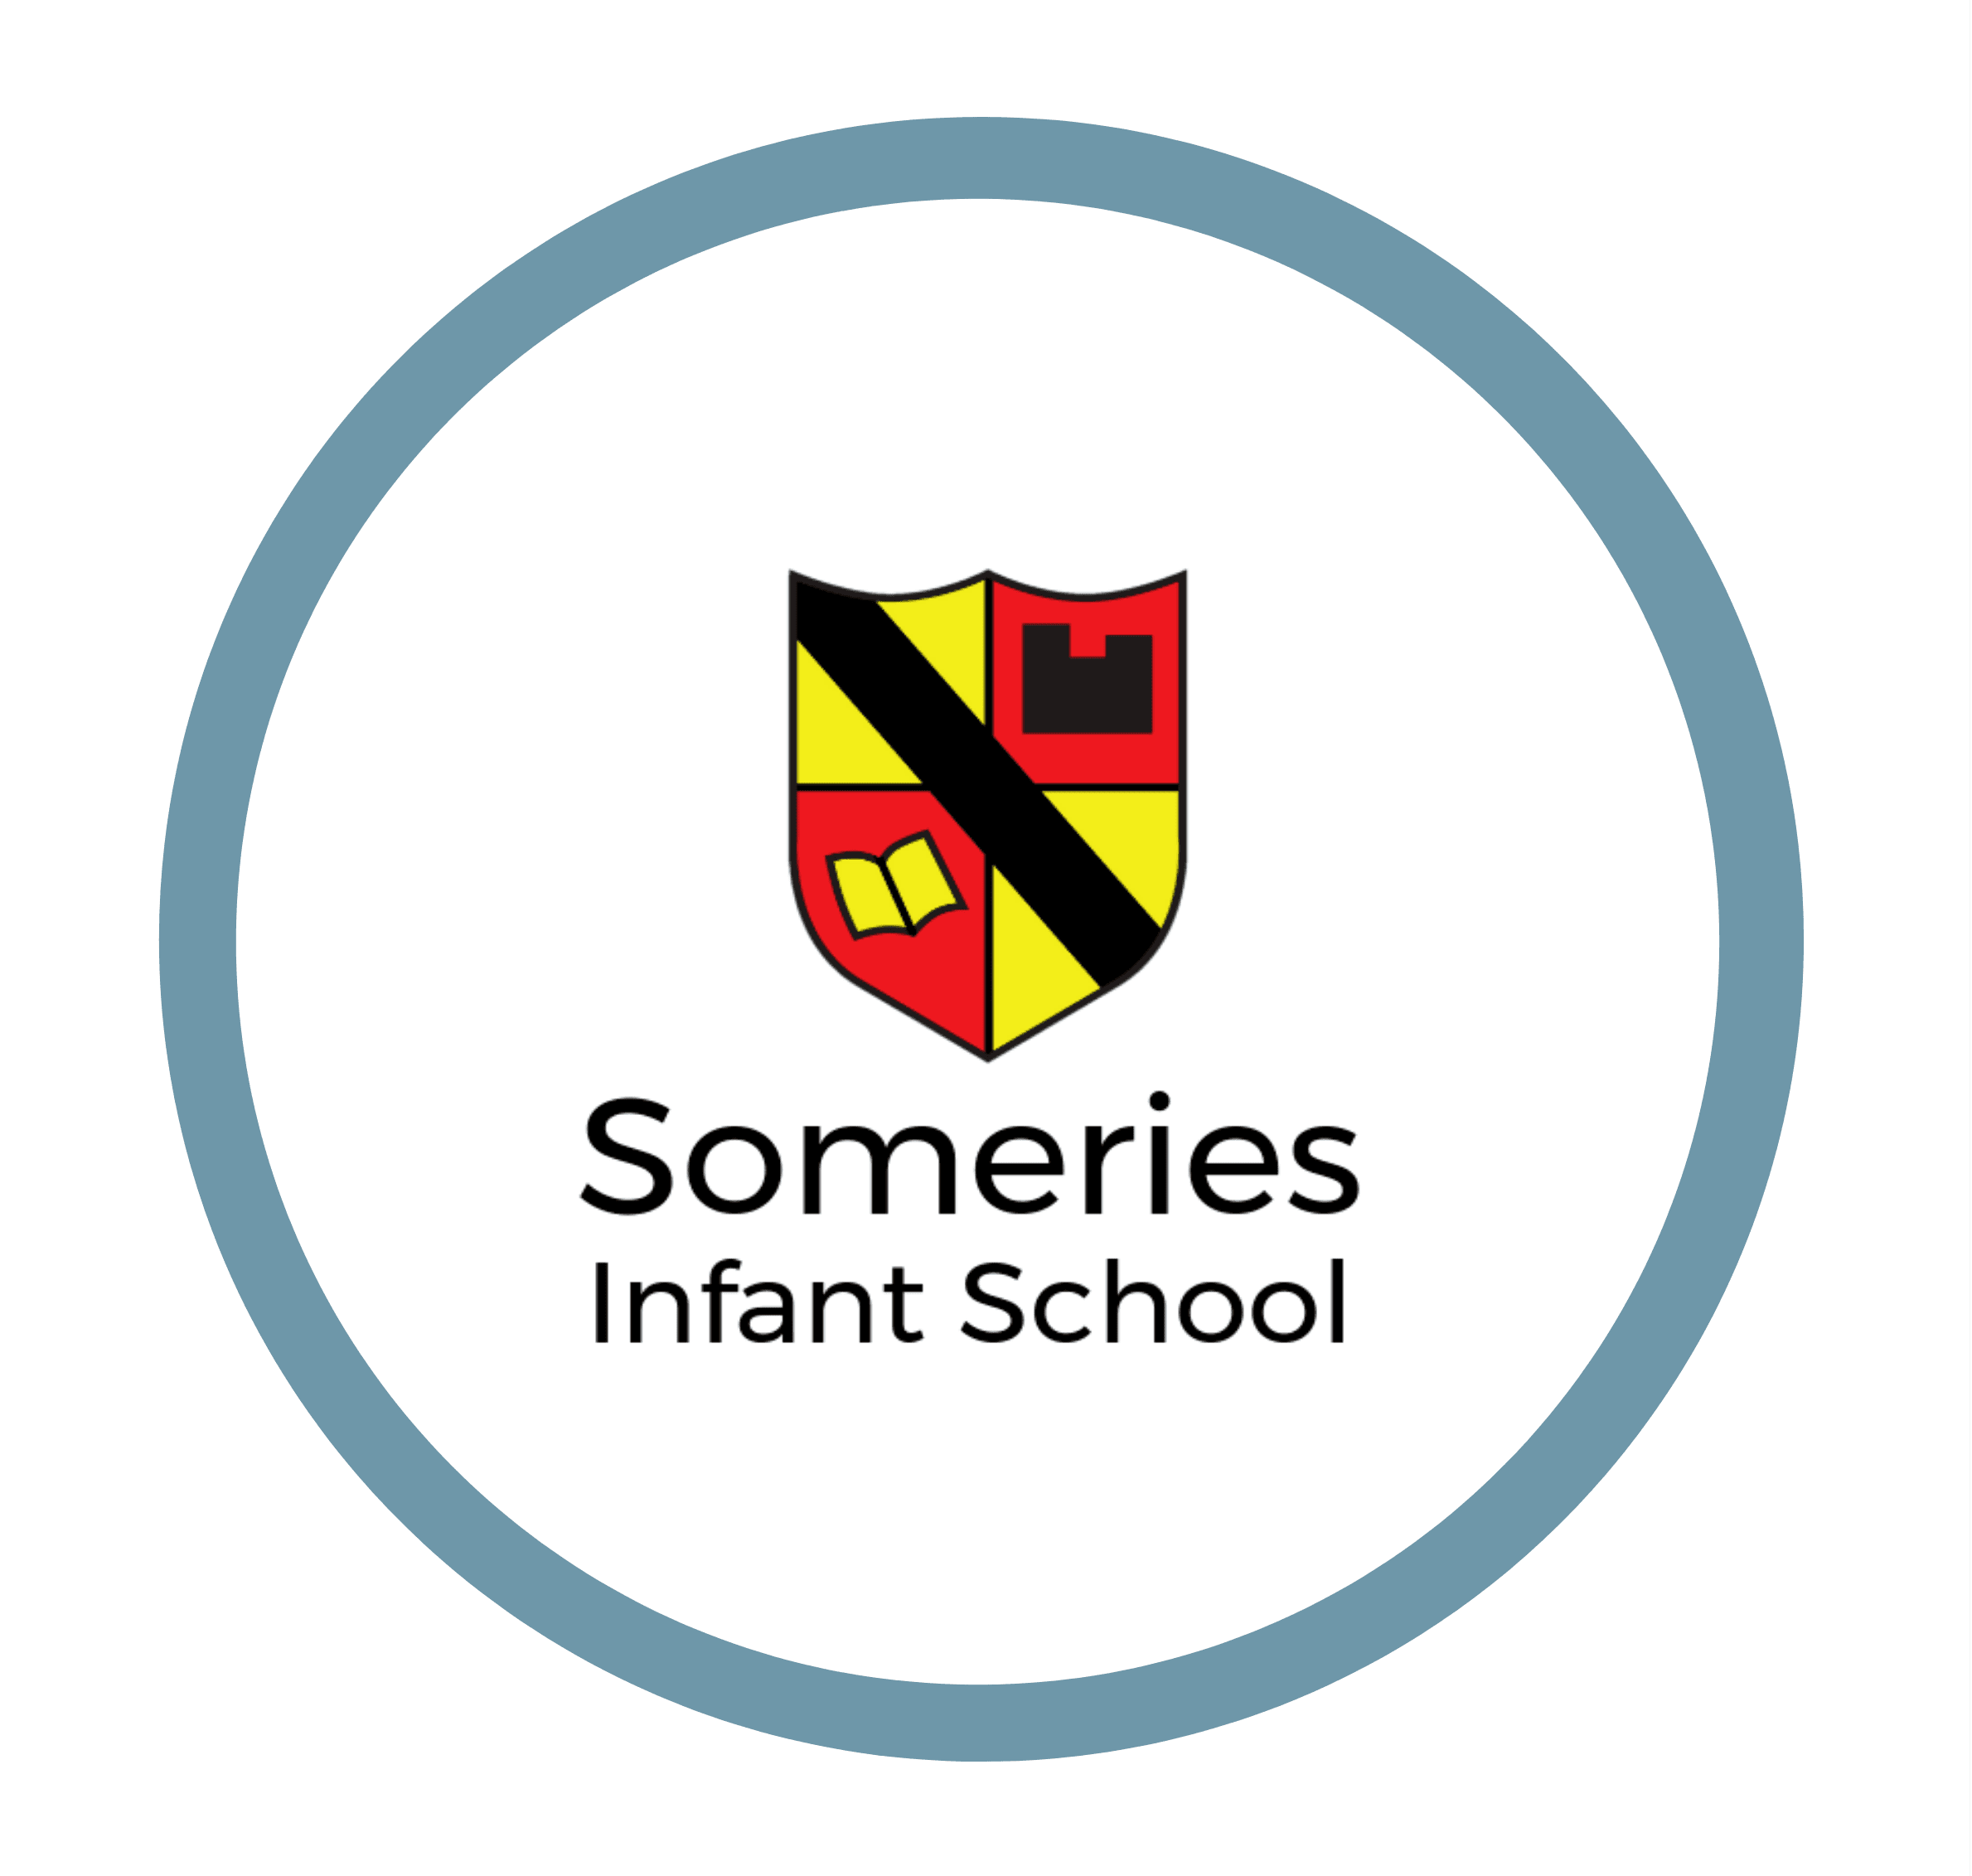 Someries Infant School and Early Childhood Education Centre